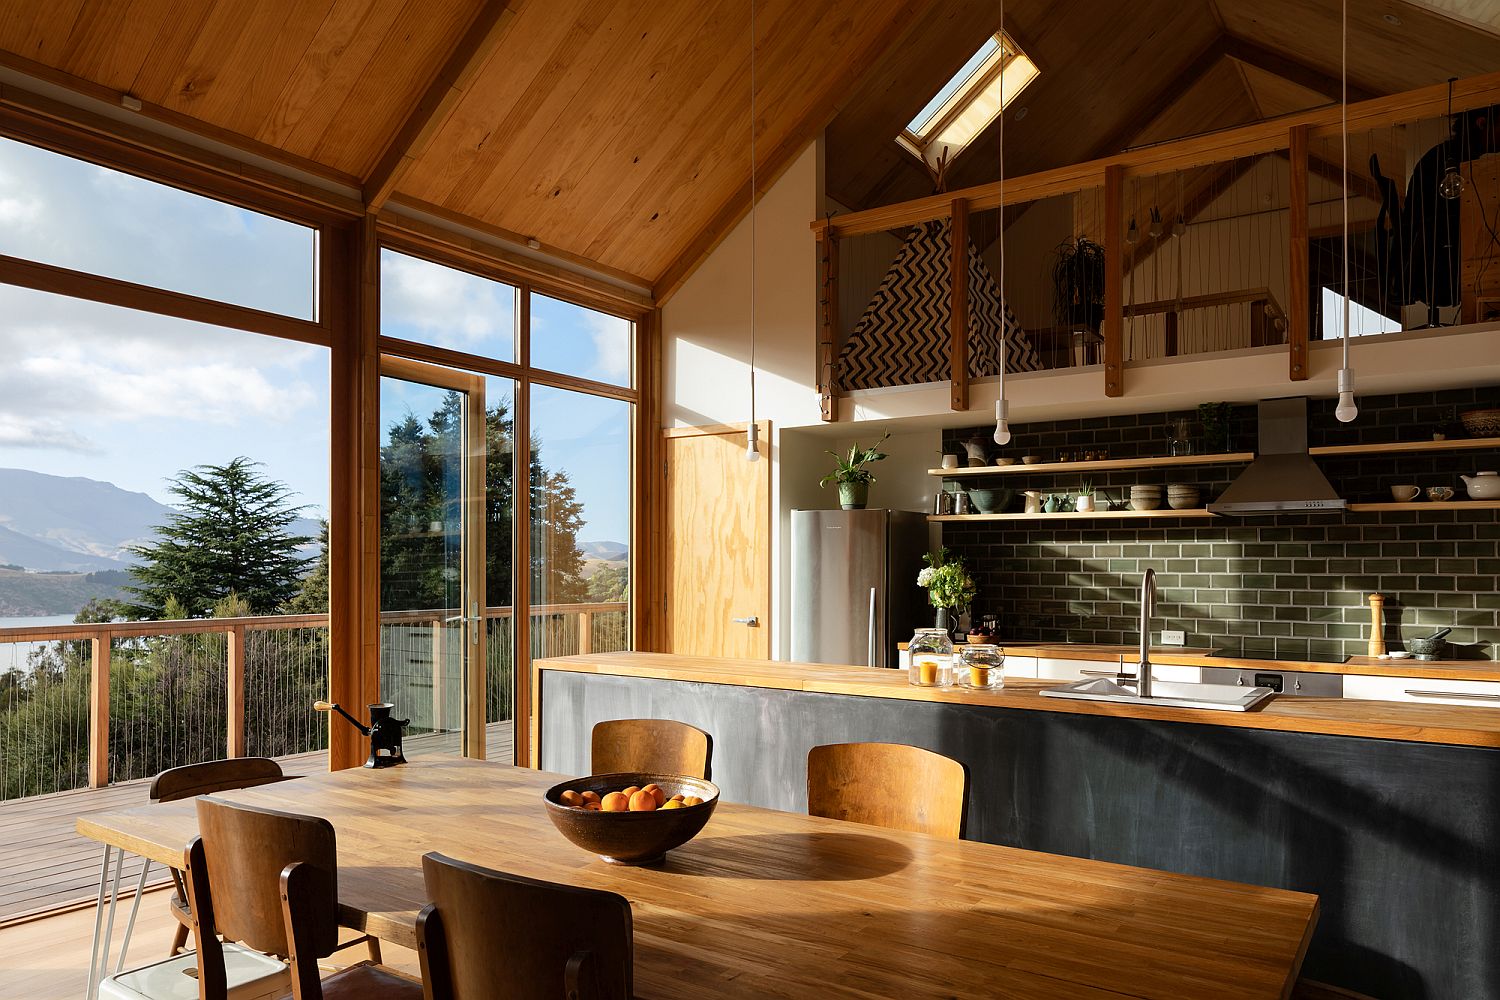 Kitchen and dining area of the New Zealand home with lovely mountain views